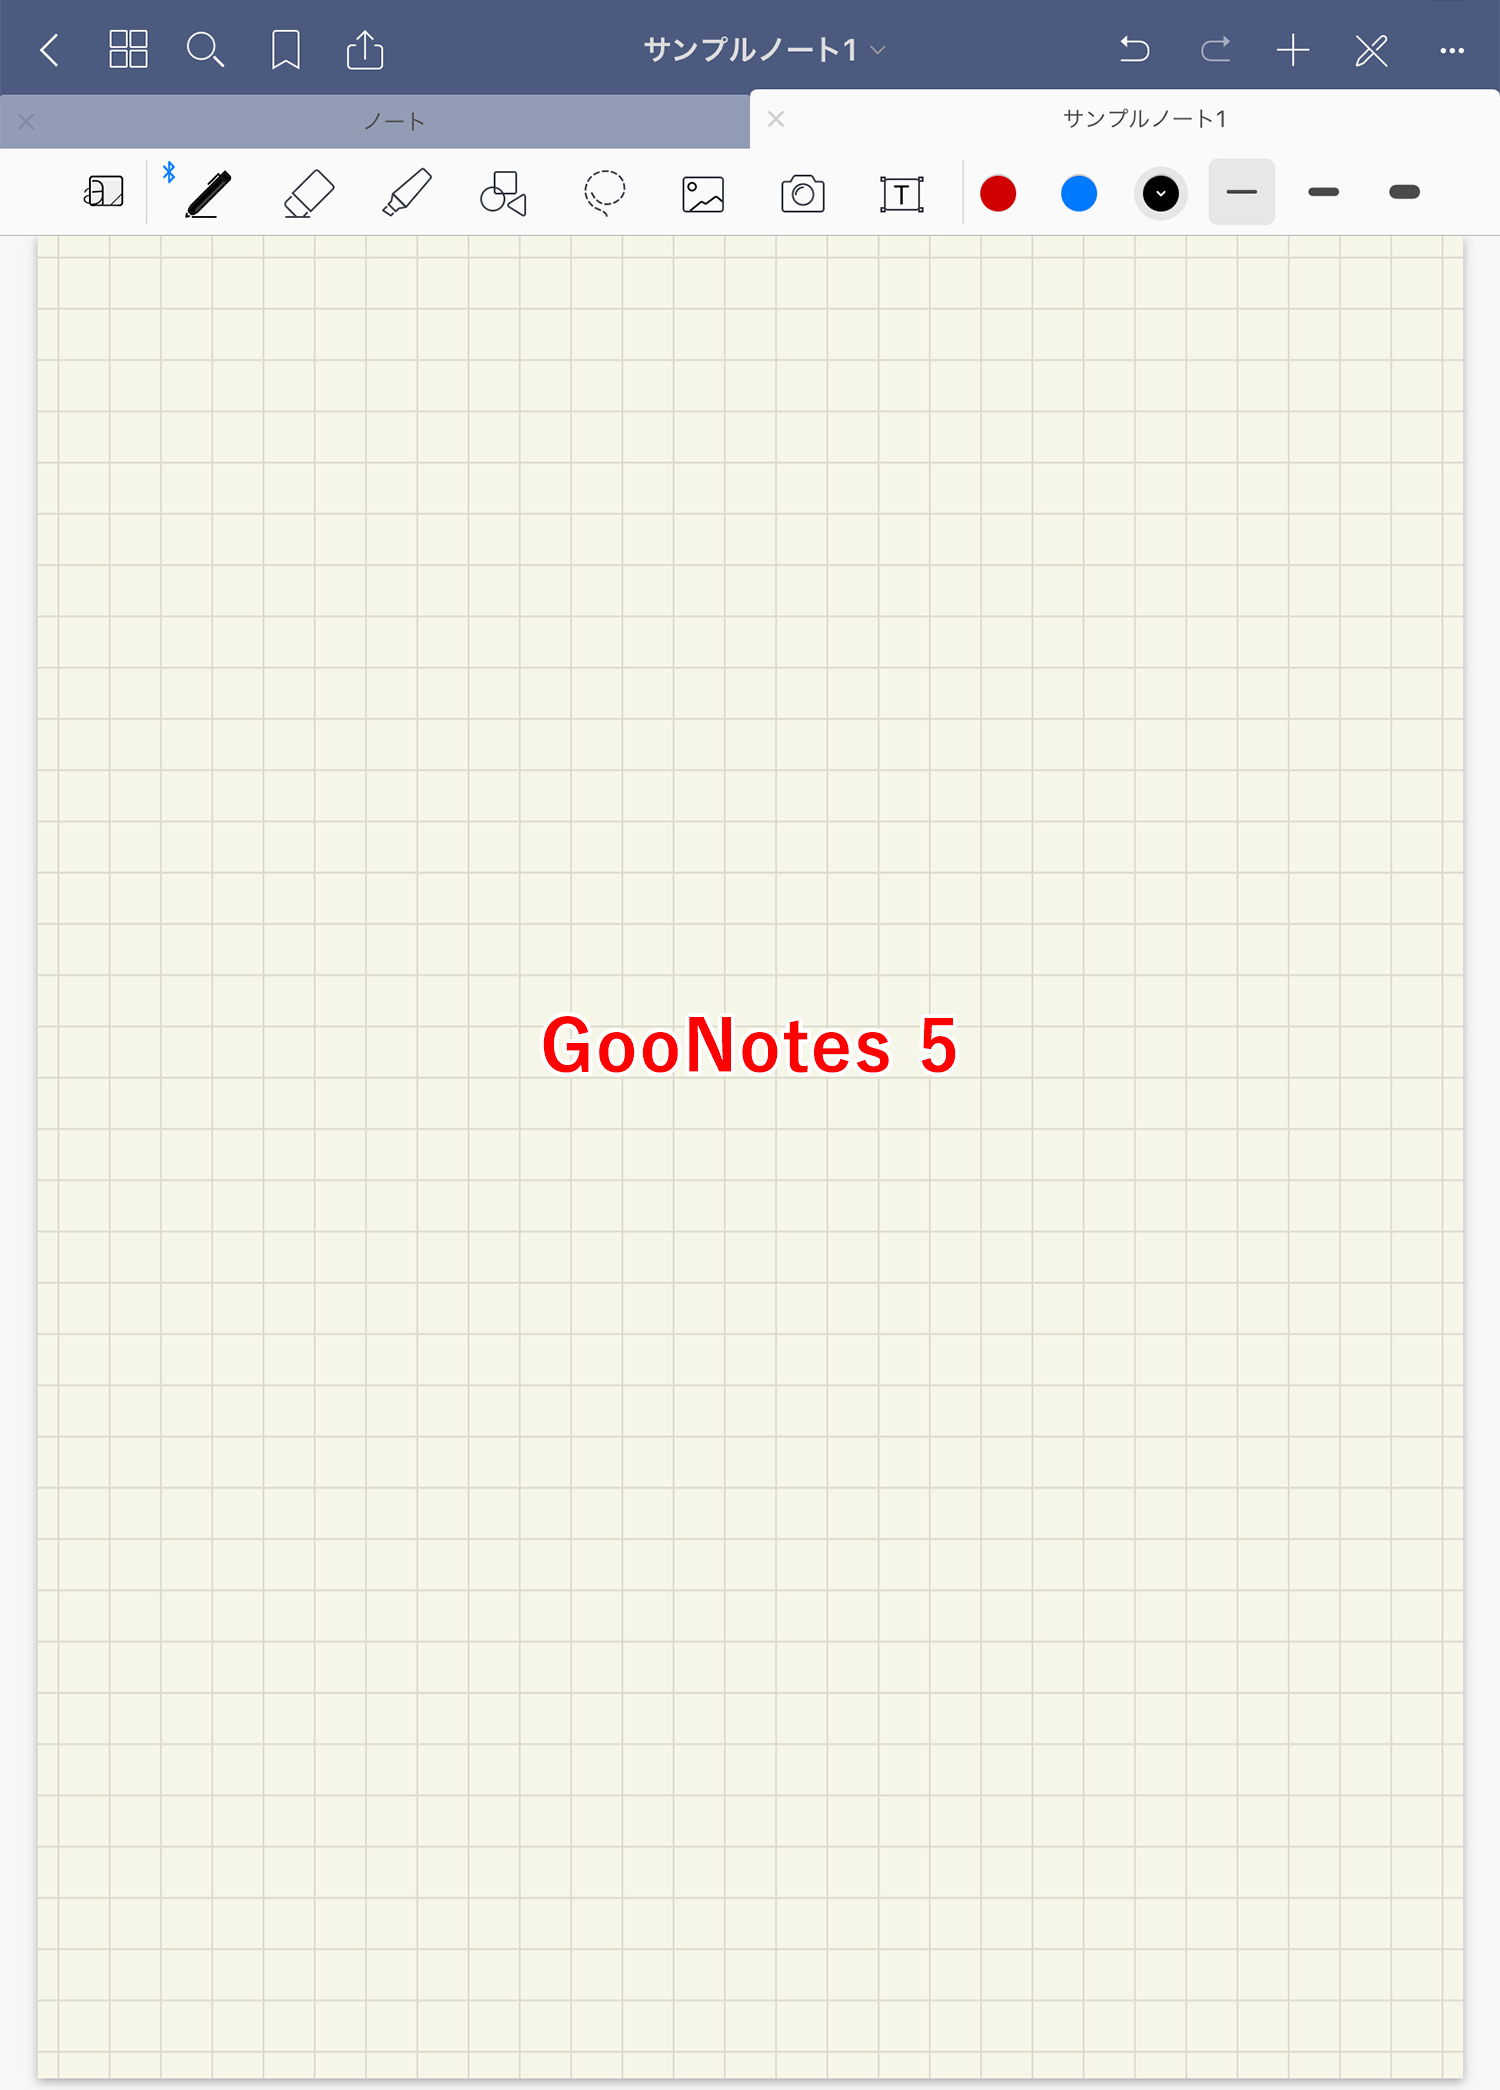 GoodNotes 5のノートのユーザーインターフェース（比較）